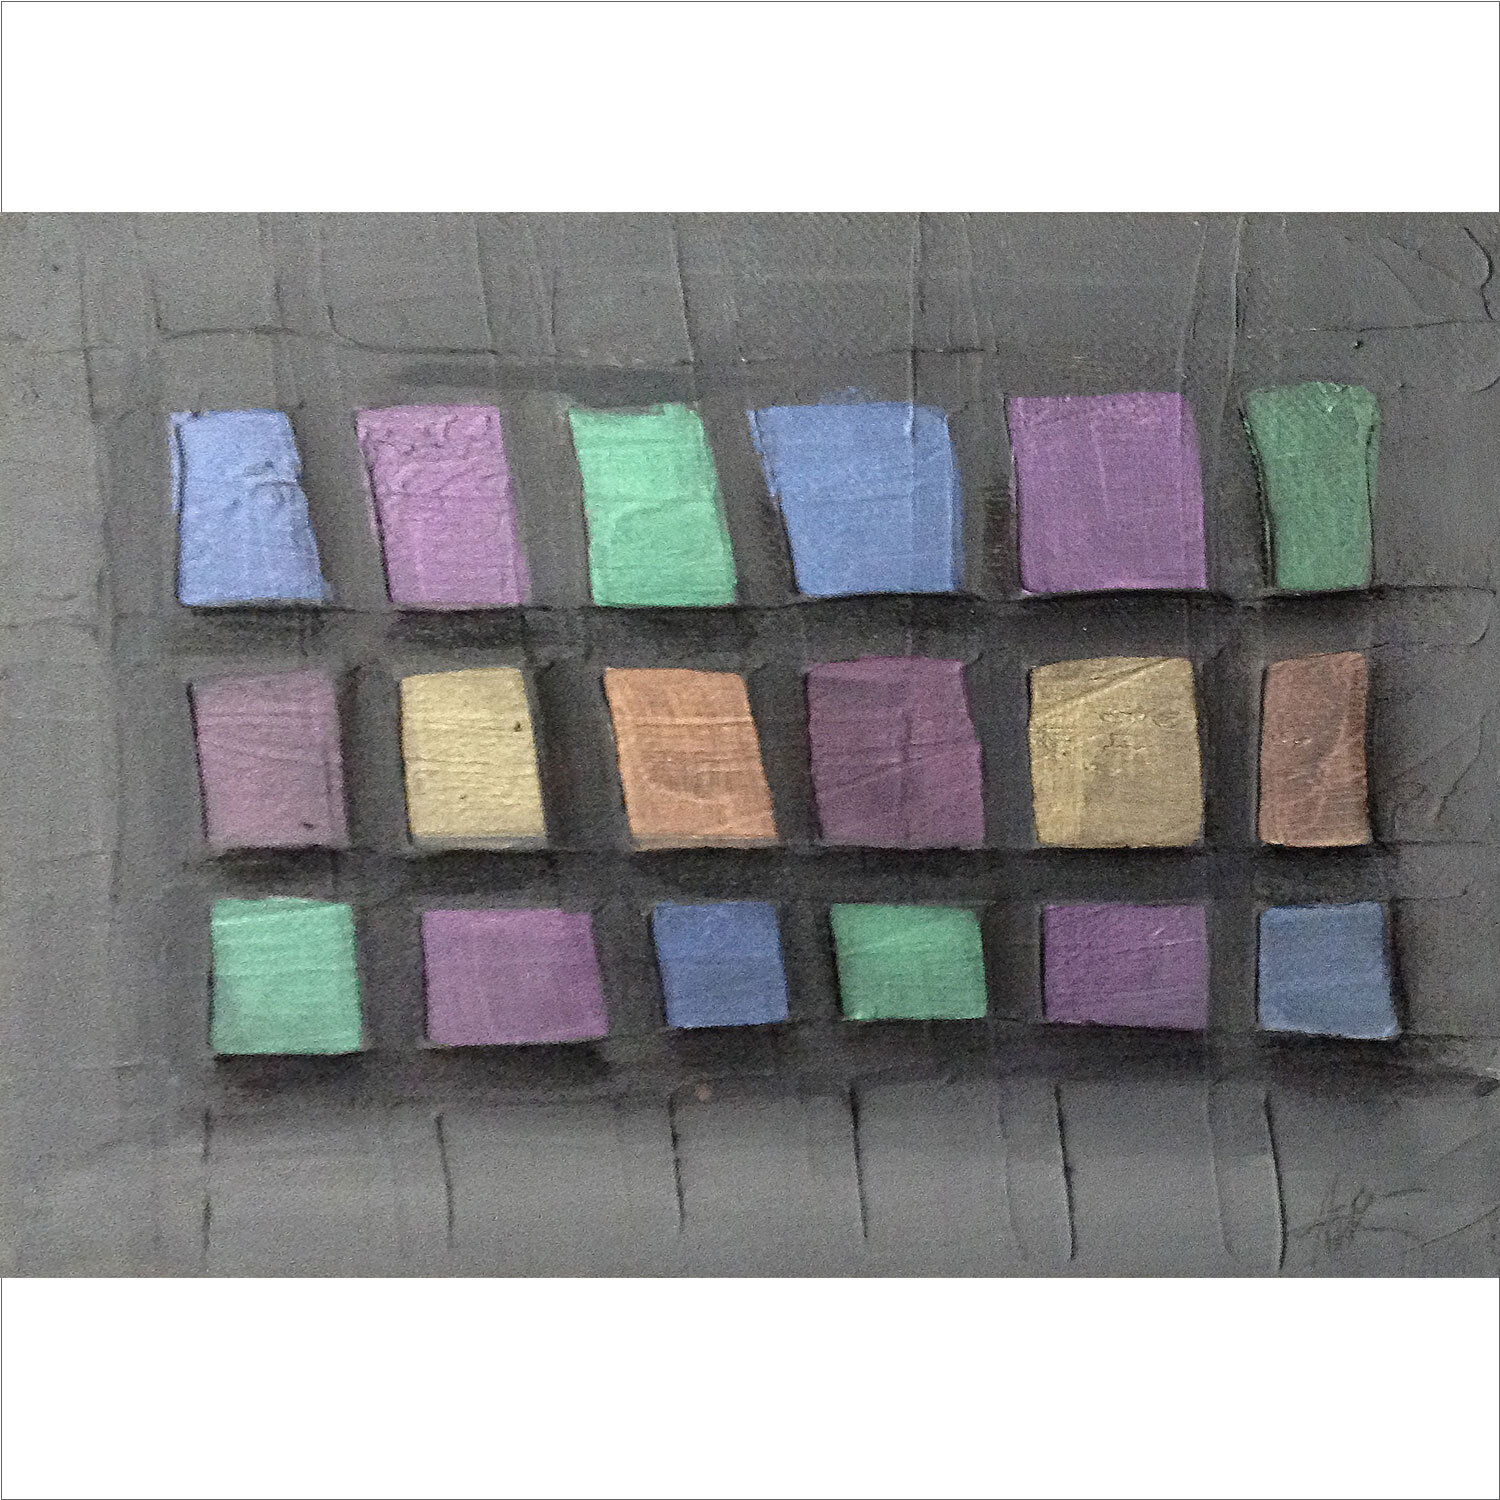   Twenty Four Squares , acrylic and charcoal on canvas,  7 x 5 inches 